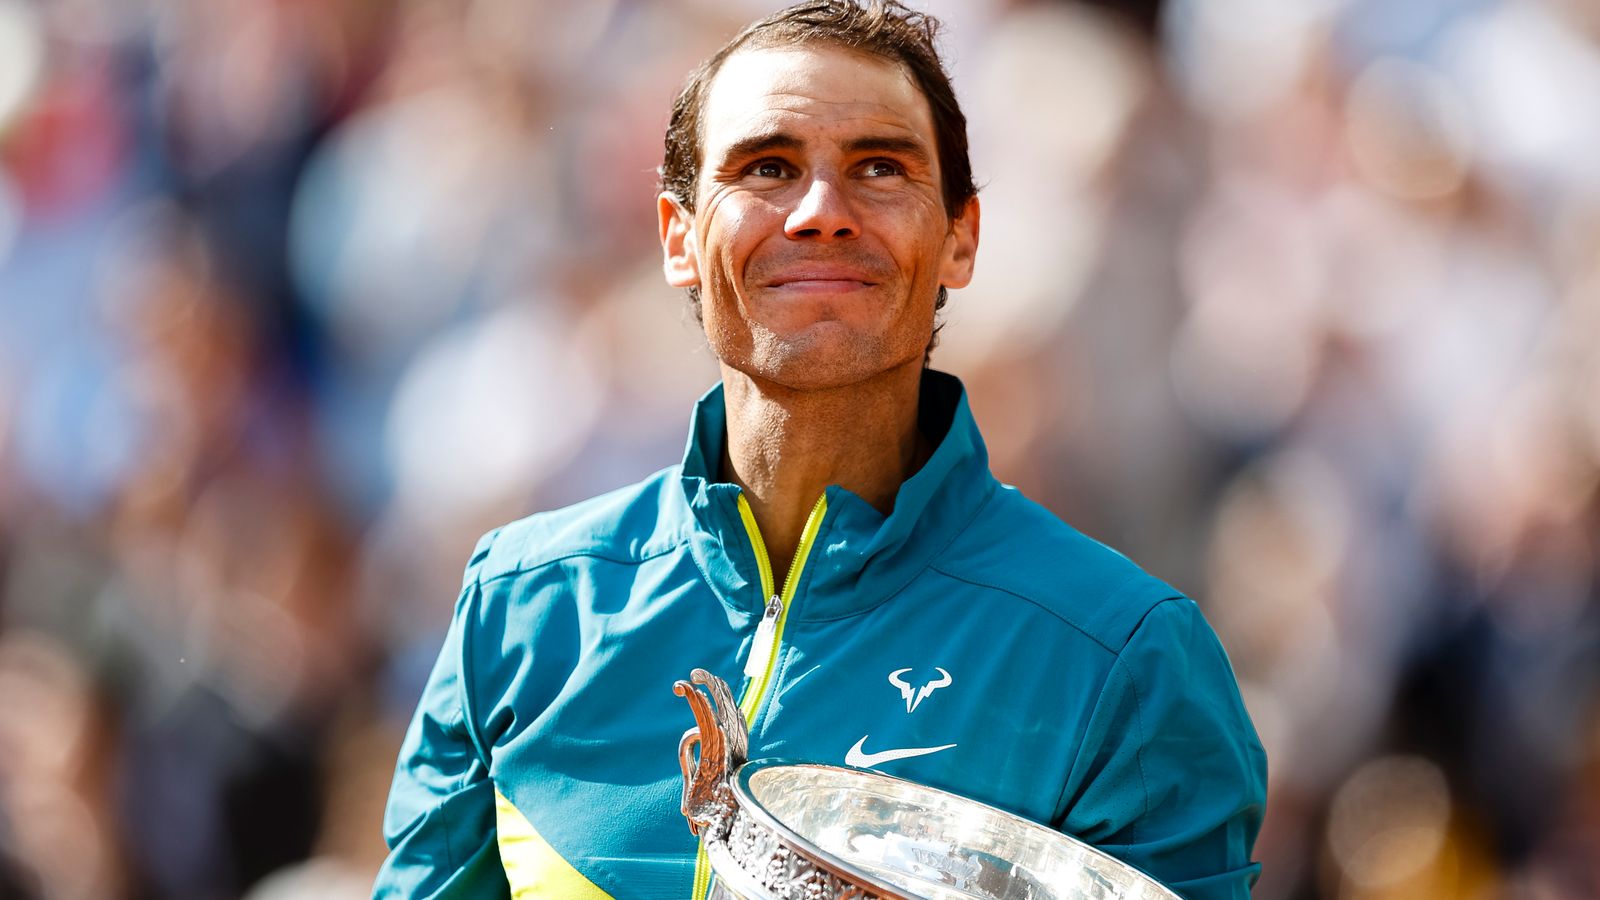 Rafael Nadal: The King of Grand Slams after winning a 14th French Open and 22nd Grand Slam